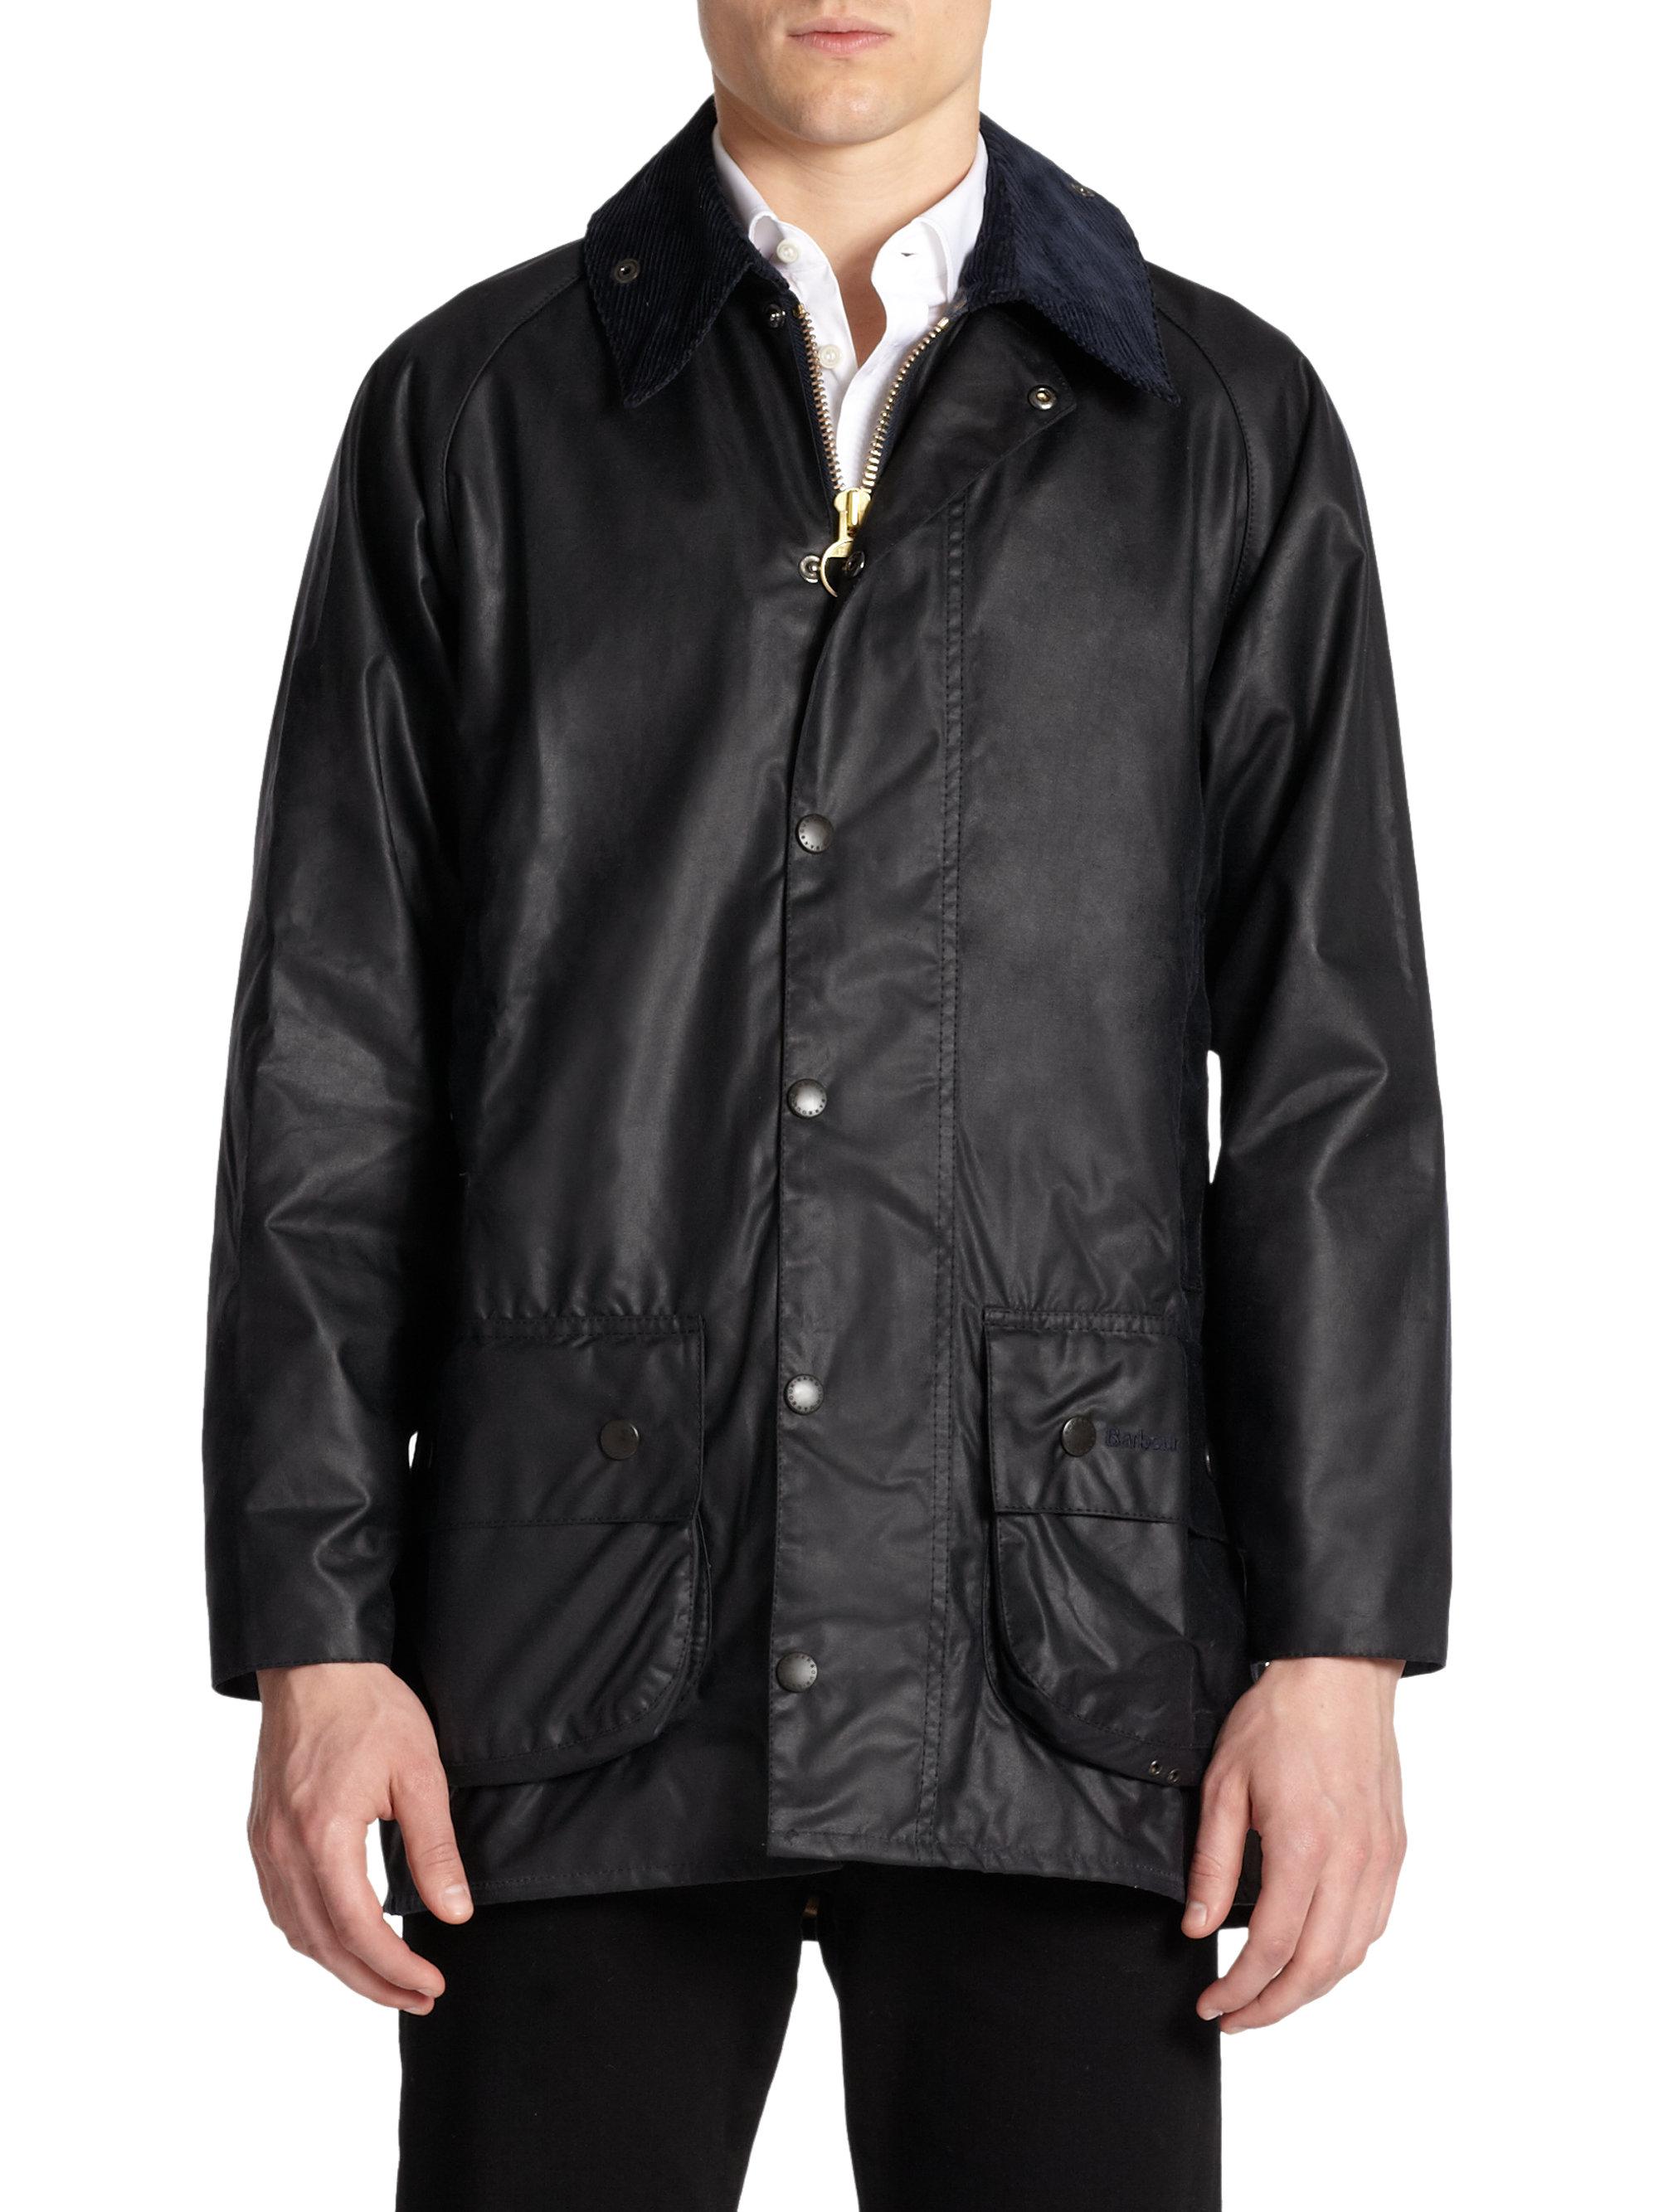 Lyst - Barbour Classic Bedale Jacket in Blue for Men